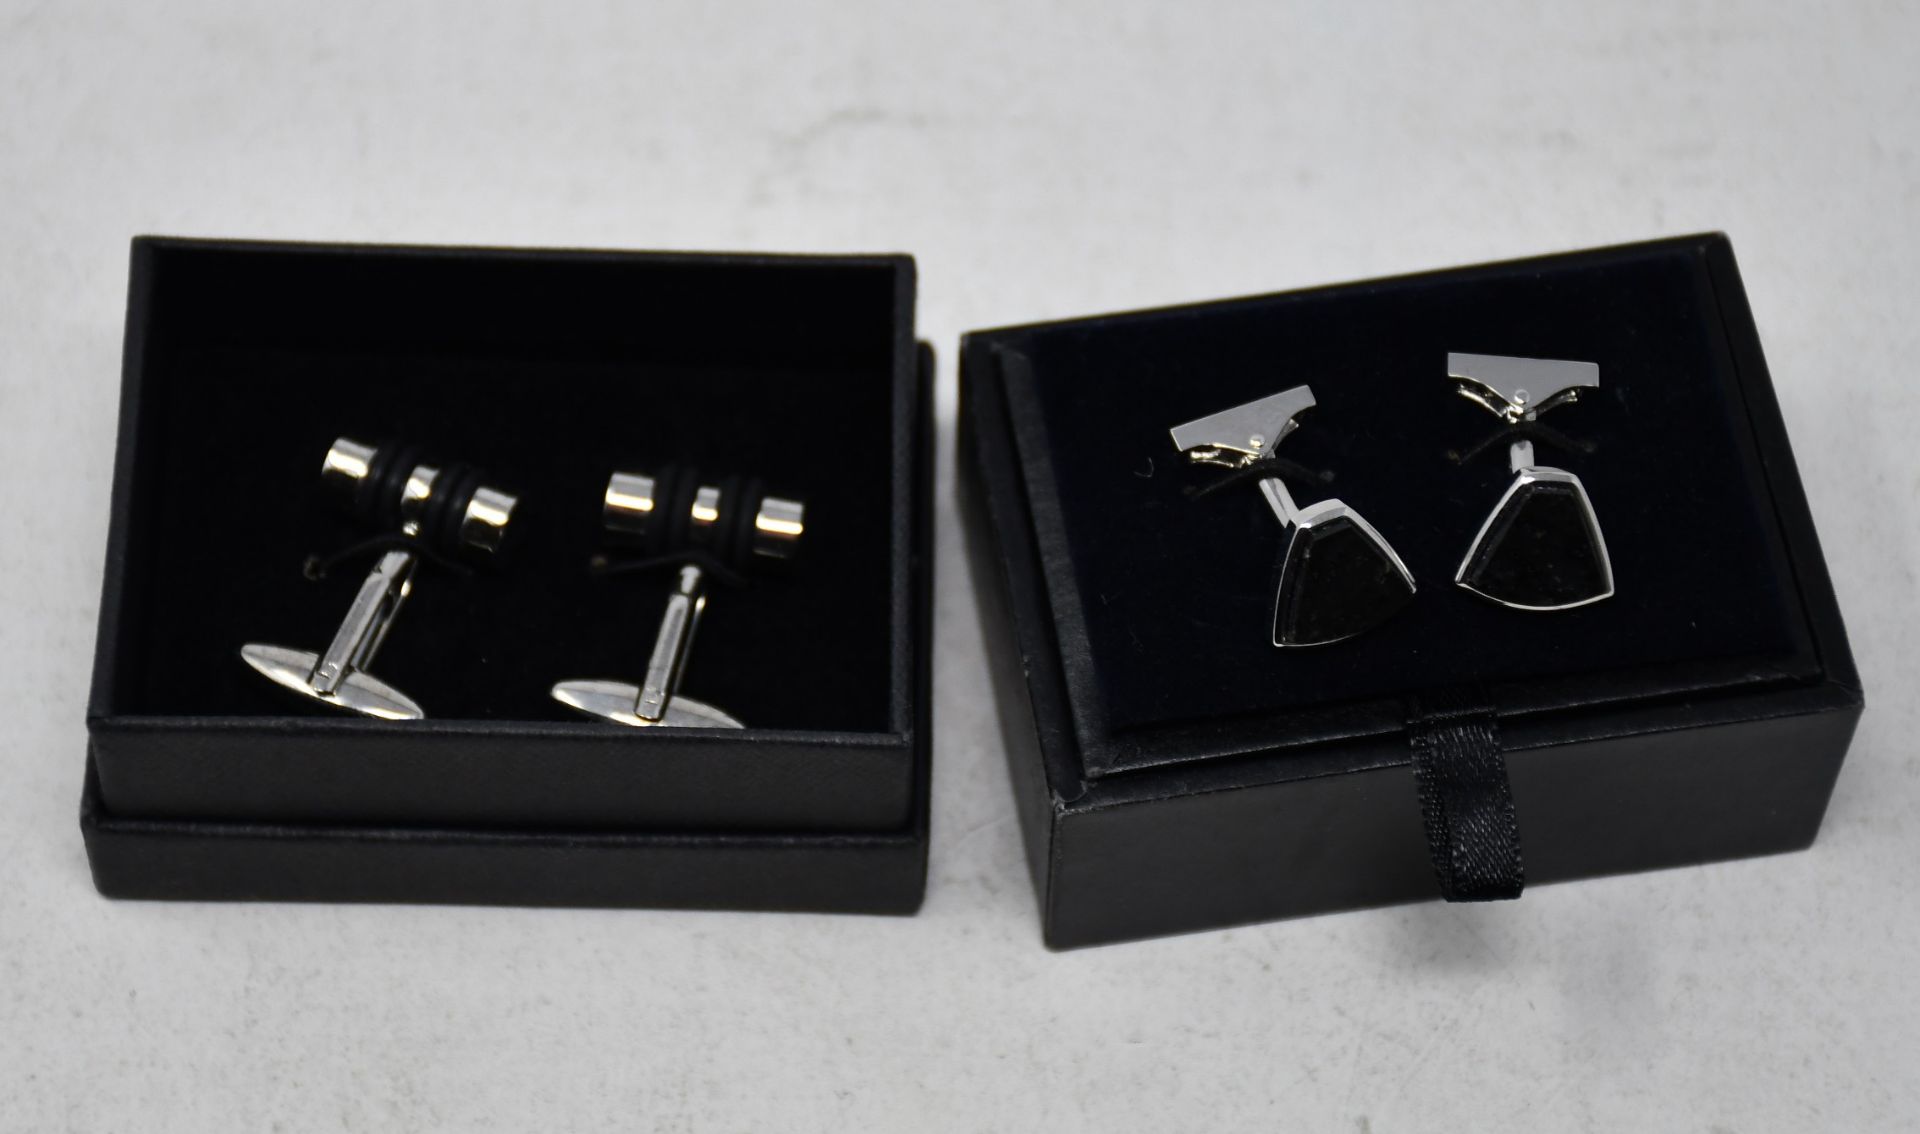 One pre-owned Massimo Dutti cufflinks. One pre-owned Martin & Co shirt cufflinks.